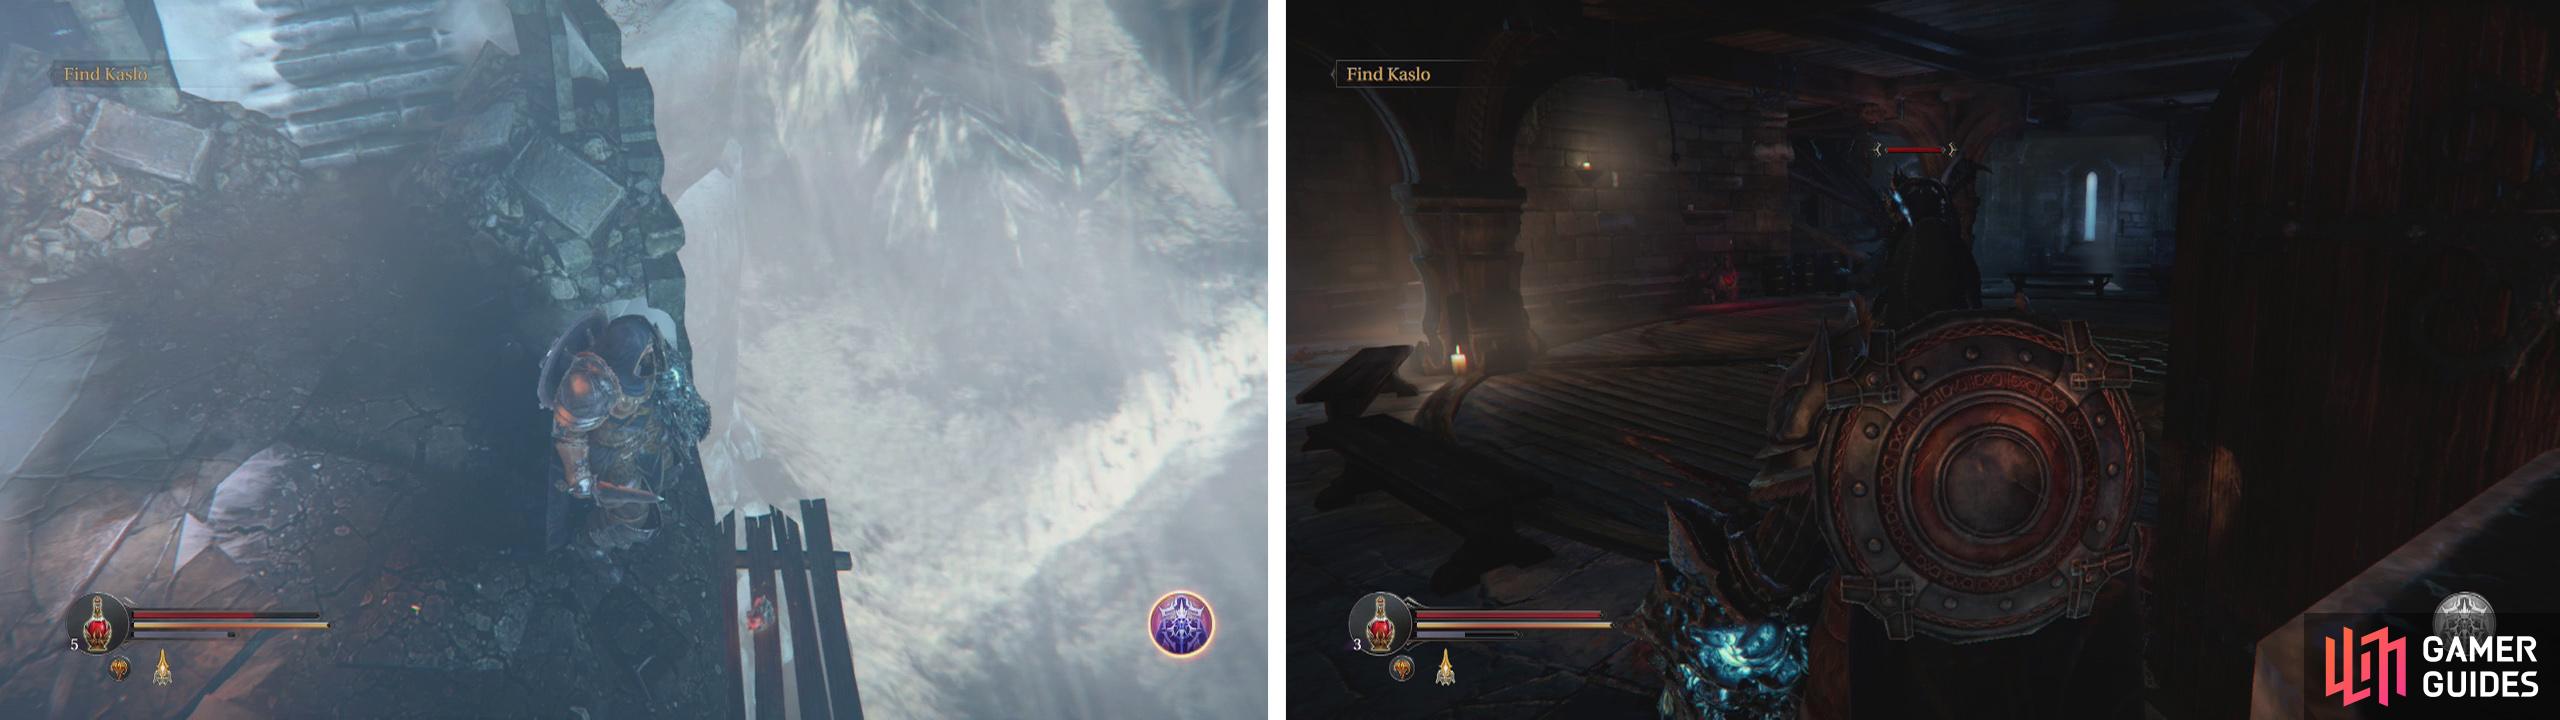 Drop tot he platform with the key from the South Watchtower (left). Fight your way through the enemies until you reach Yetkas Dagger (right).